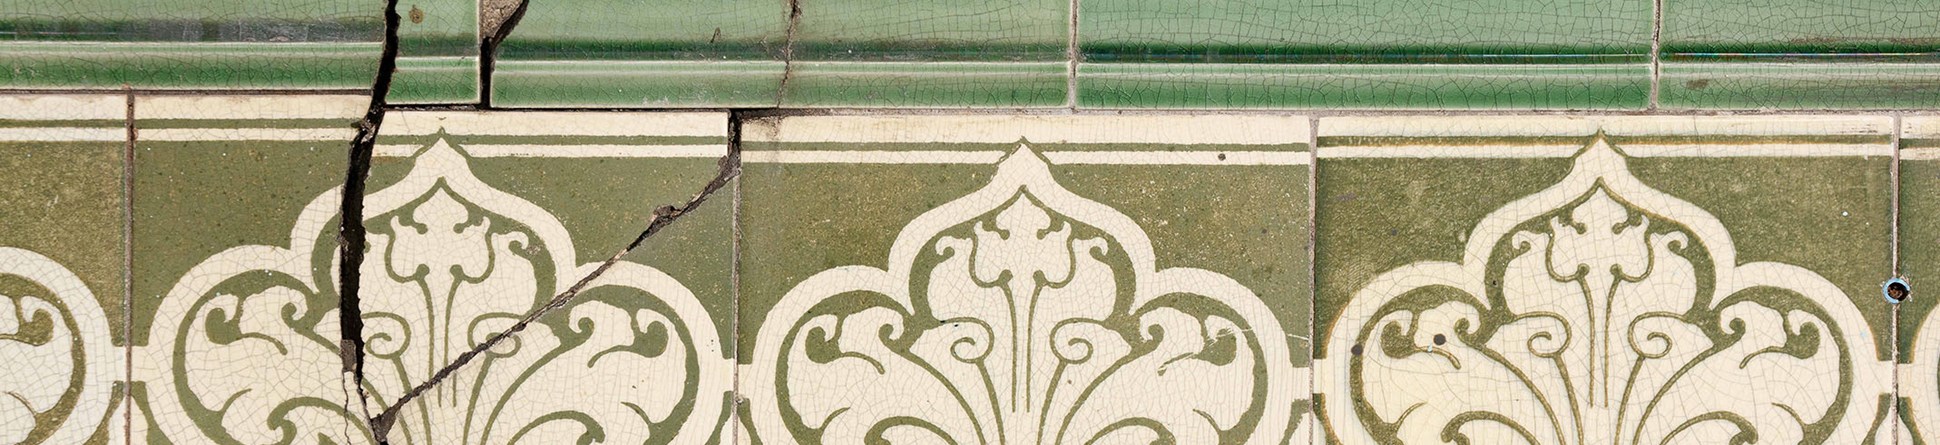 Original Pilkington tiles in green and cream. Some of them are cracked.